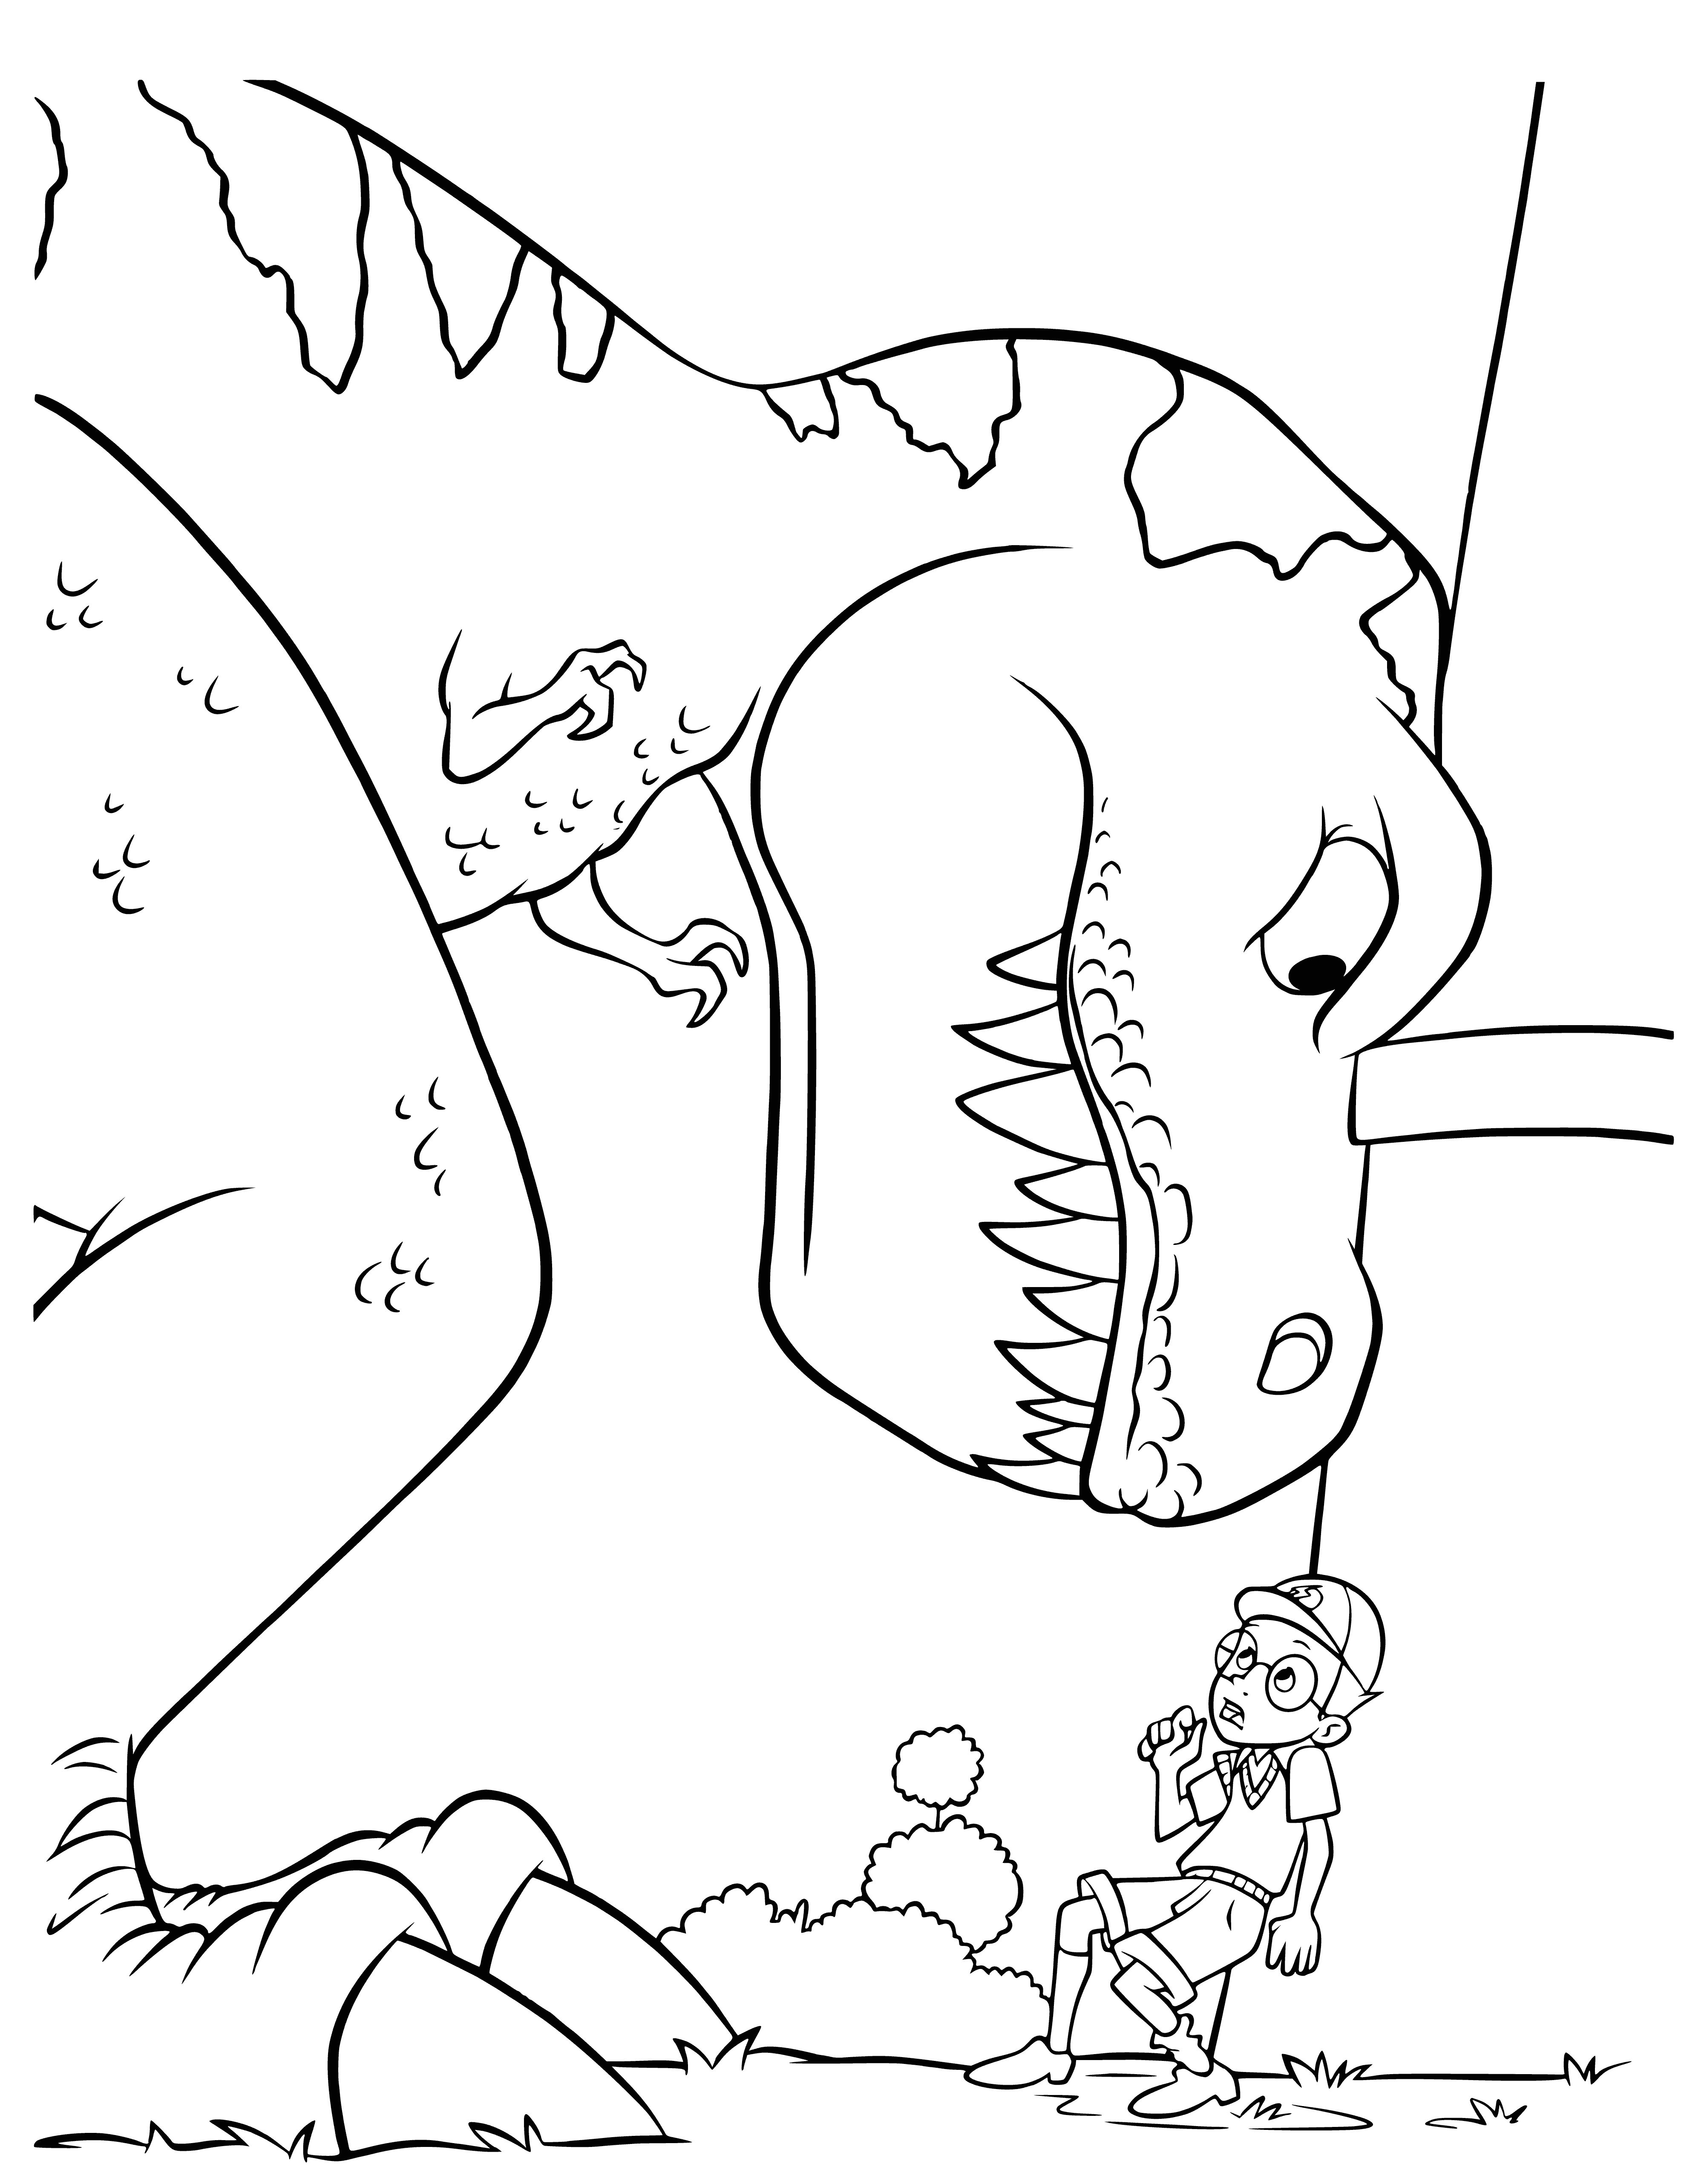 coloring page: Large green dinosaur: long neck, small head, scales, long tail, two legs, short stubby arms.